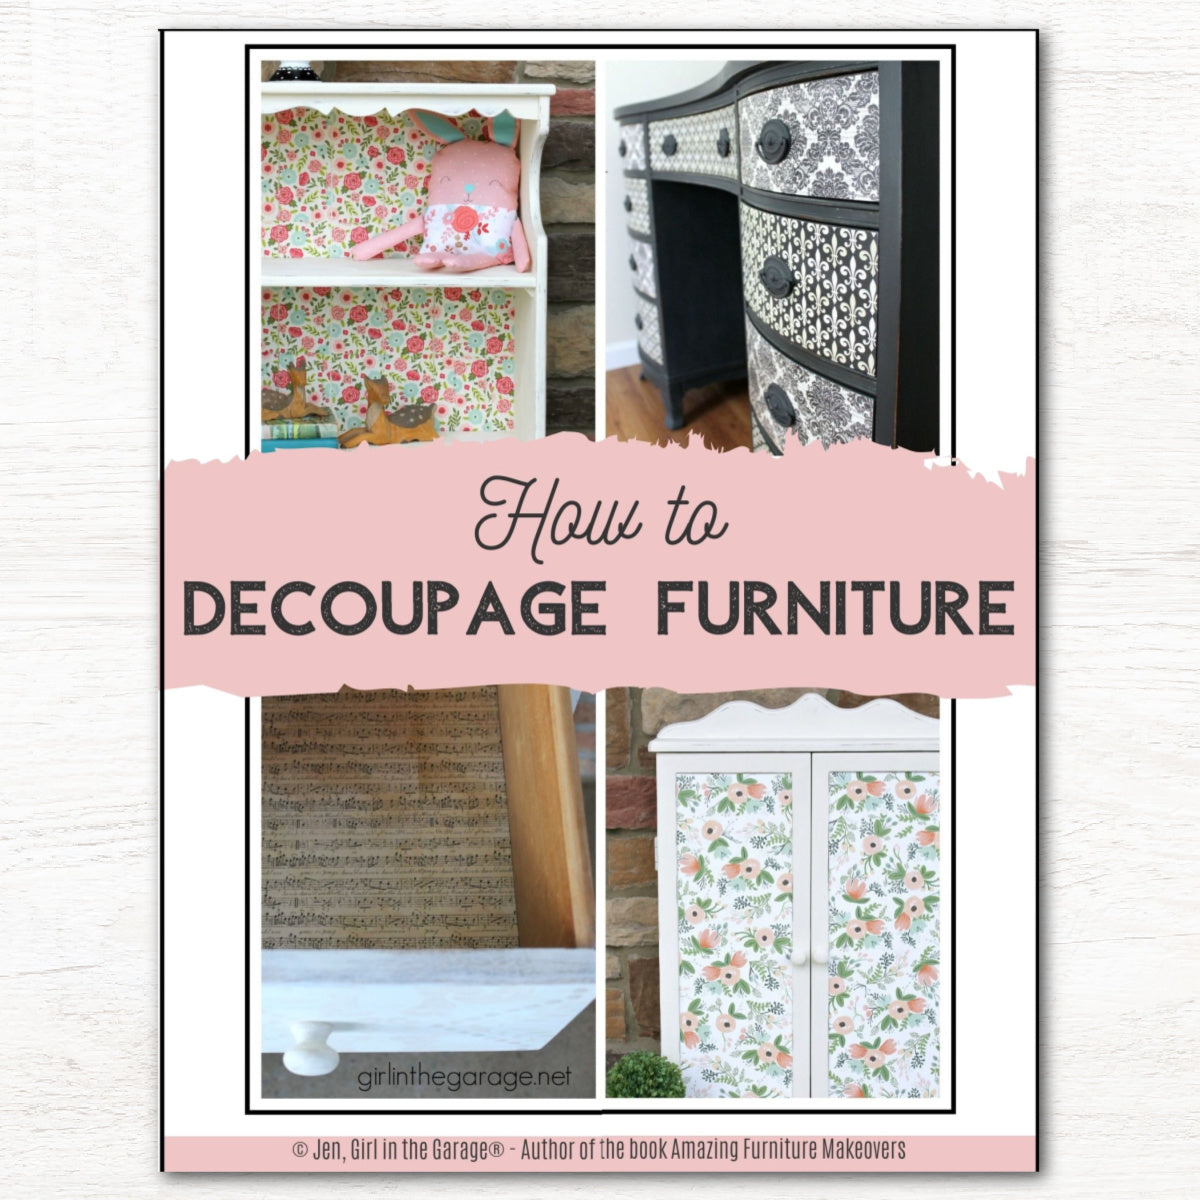 How to Decoupage Furniture - Girl in the Garage®